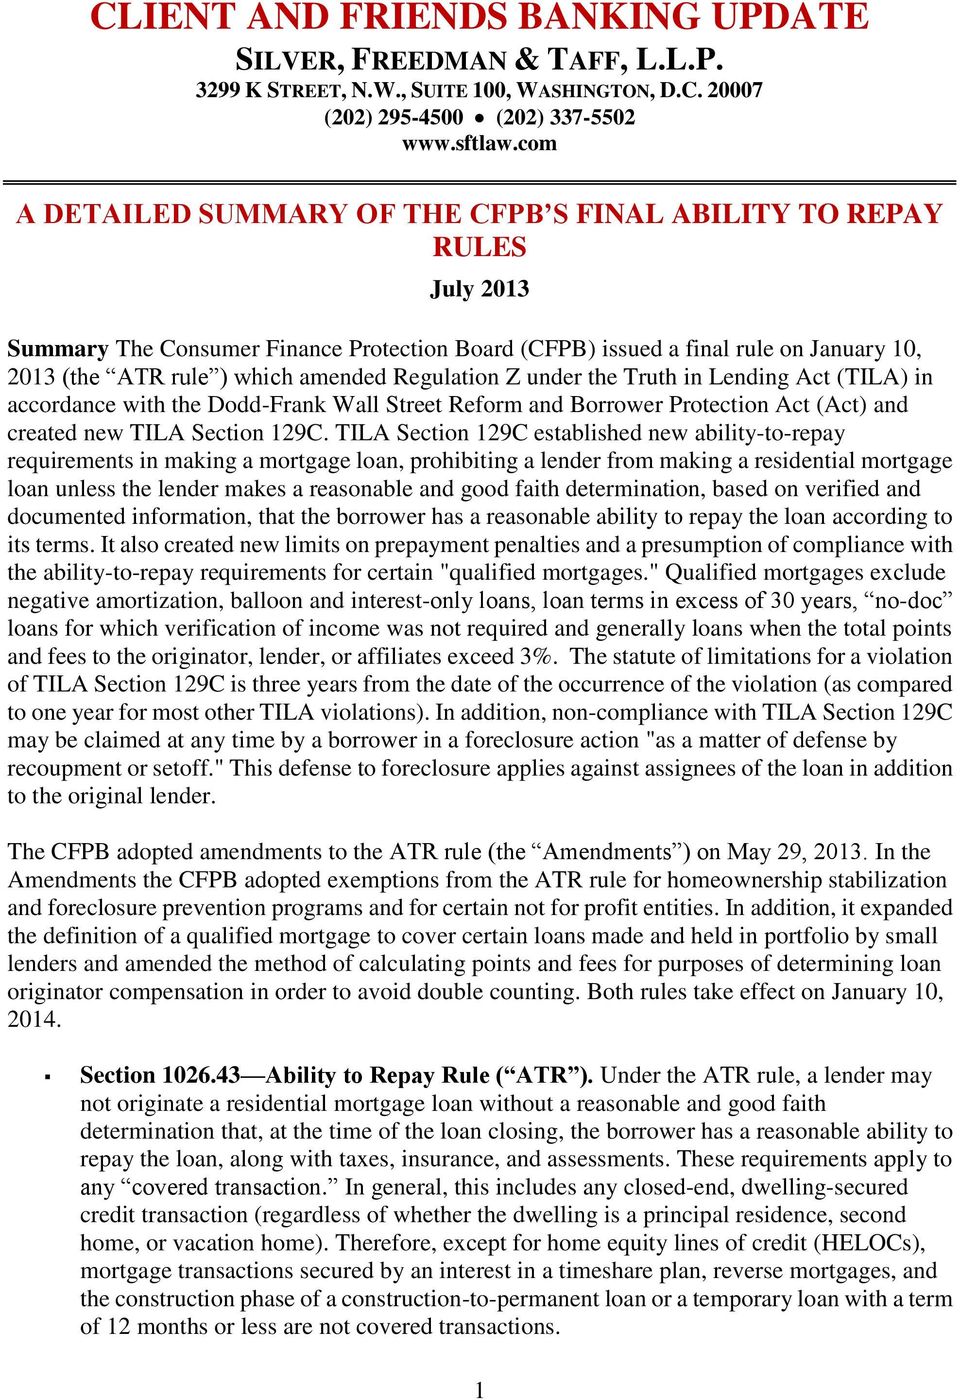 Regulation Z under the Truth in Lending Act (TILA) in accordance with the Dodd-Frank Wall Street Reform and Borrower Protection Act (Act) and created new TILA Section 129C.